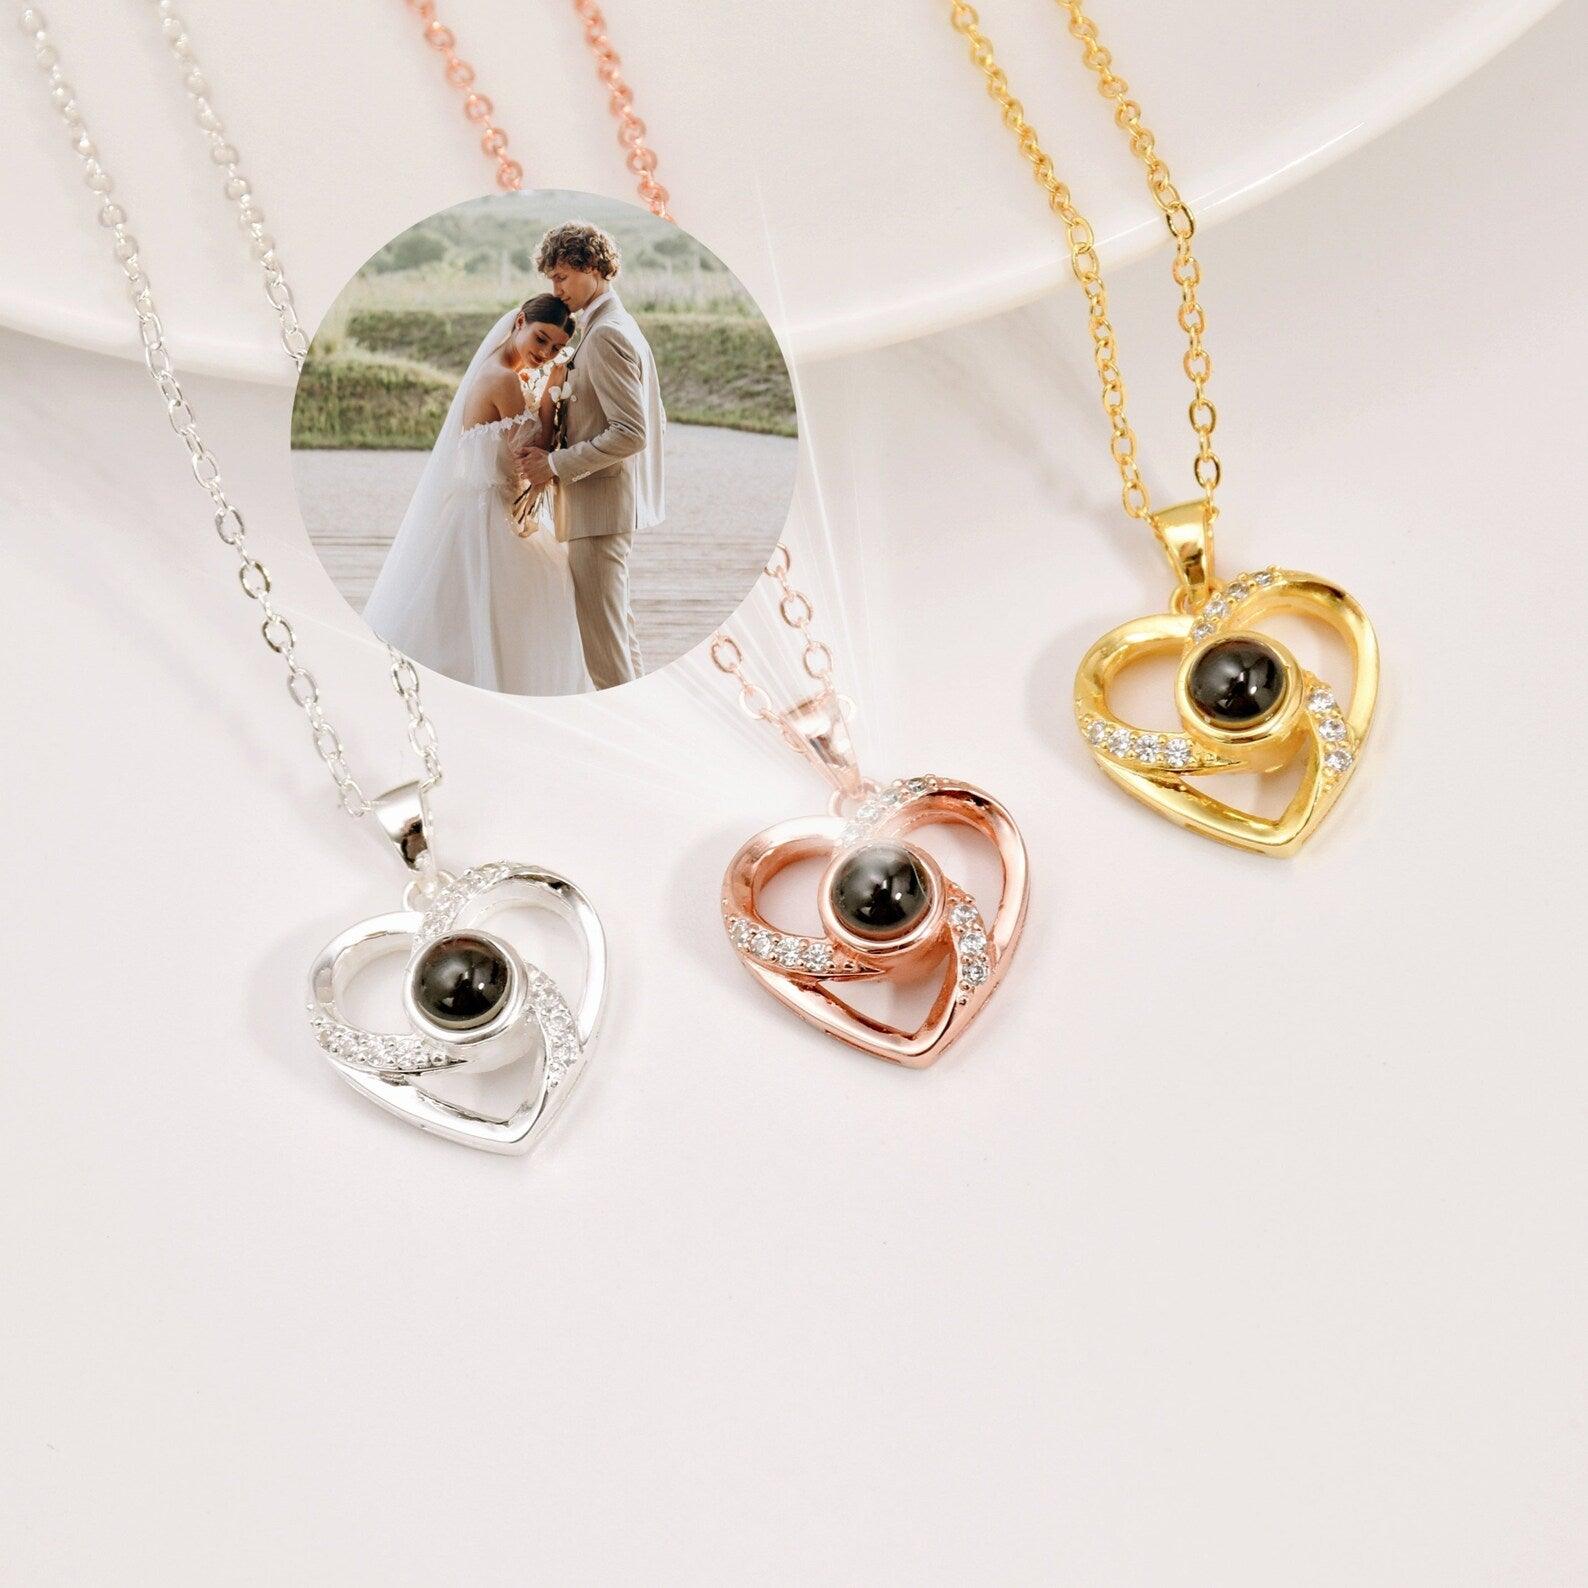 Personalized Photo Projection Necklace Jumping Heart Pendant With Picture Inside - Camillaboutiqueco